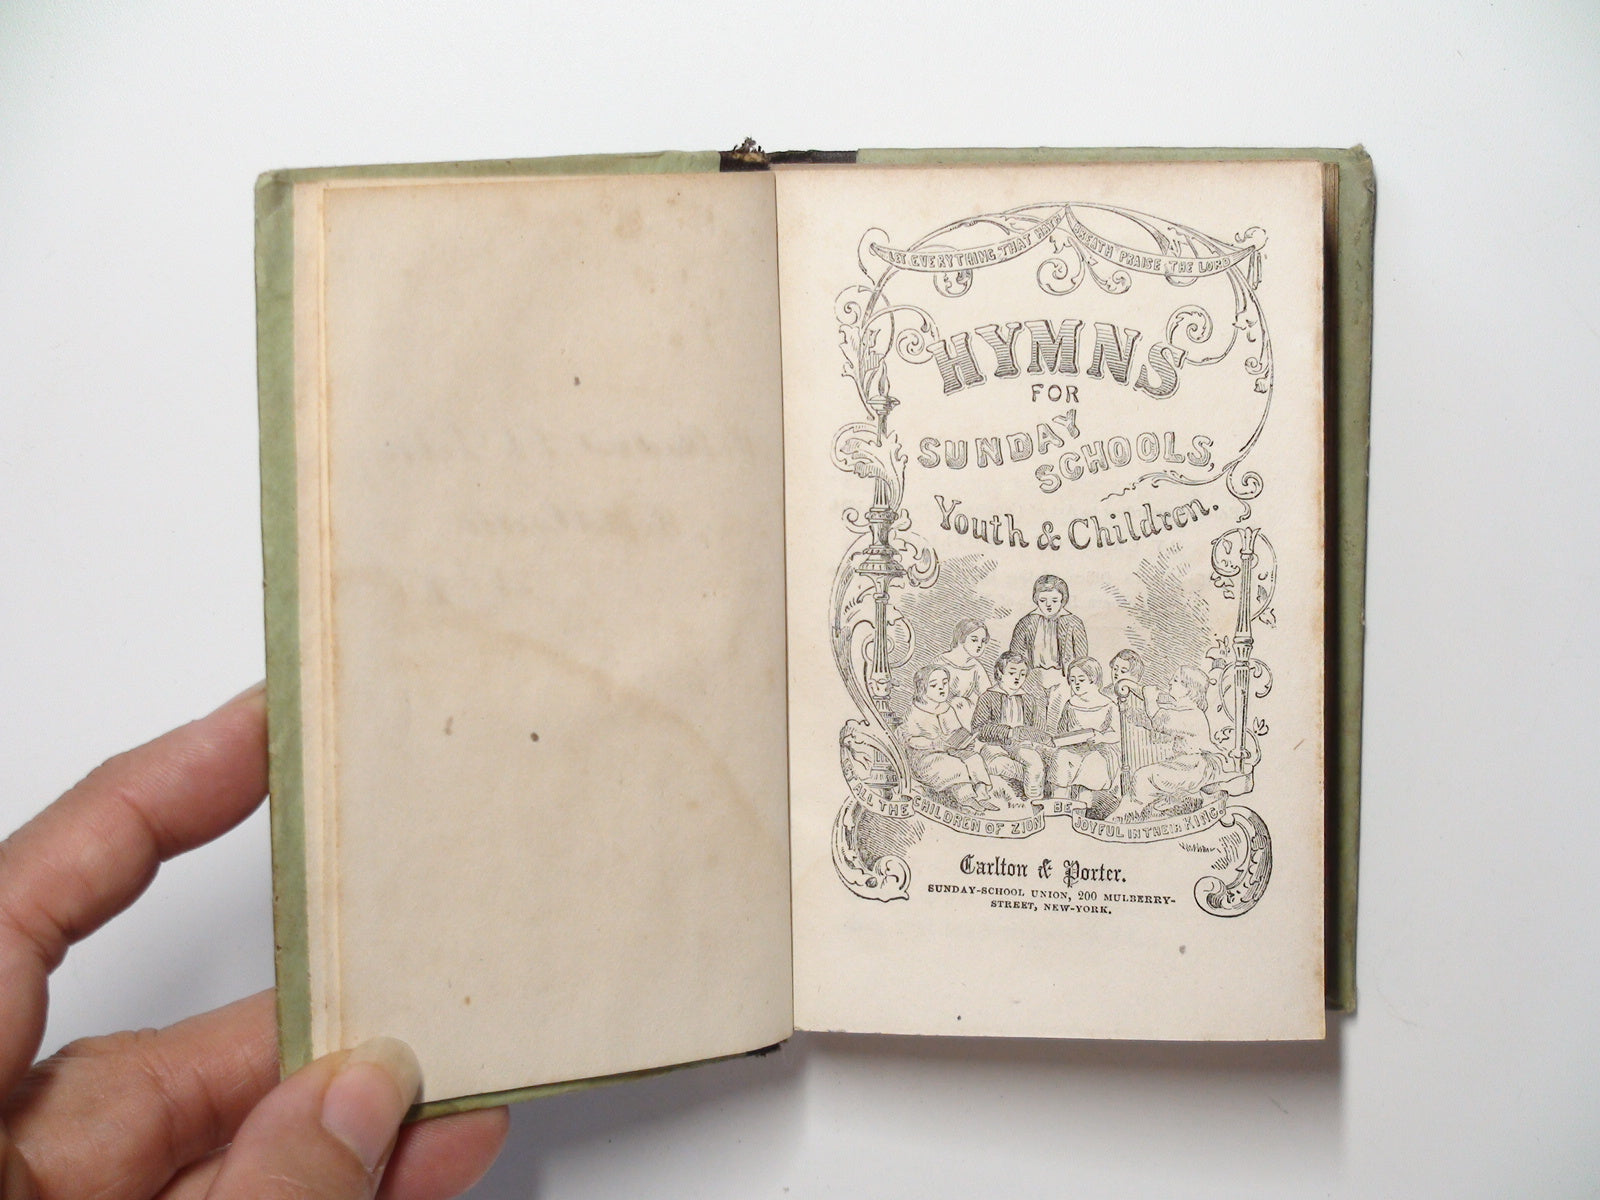 Hymns for Sunday Schools, Youth and Children, Carlton & Porter, Rare, 1854